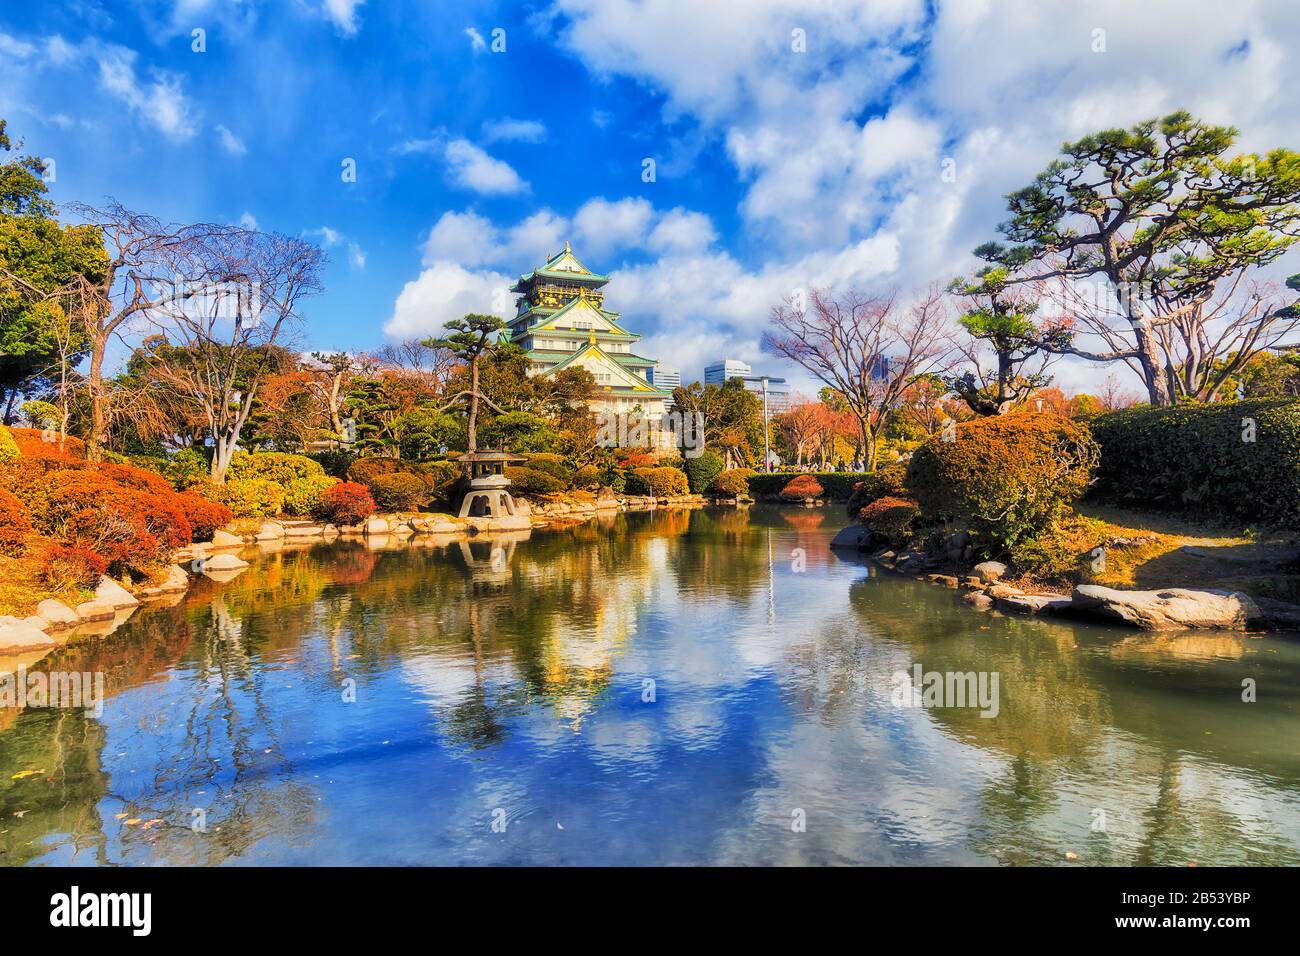 Small pond in traditional japanese garden of Public park in Osaka city on a sunny day with reflection of trees and towers. Stock Photo